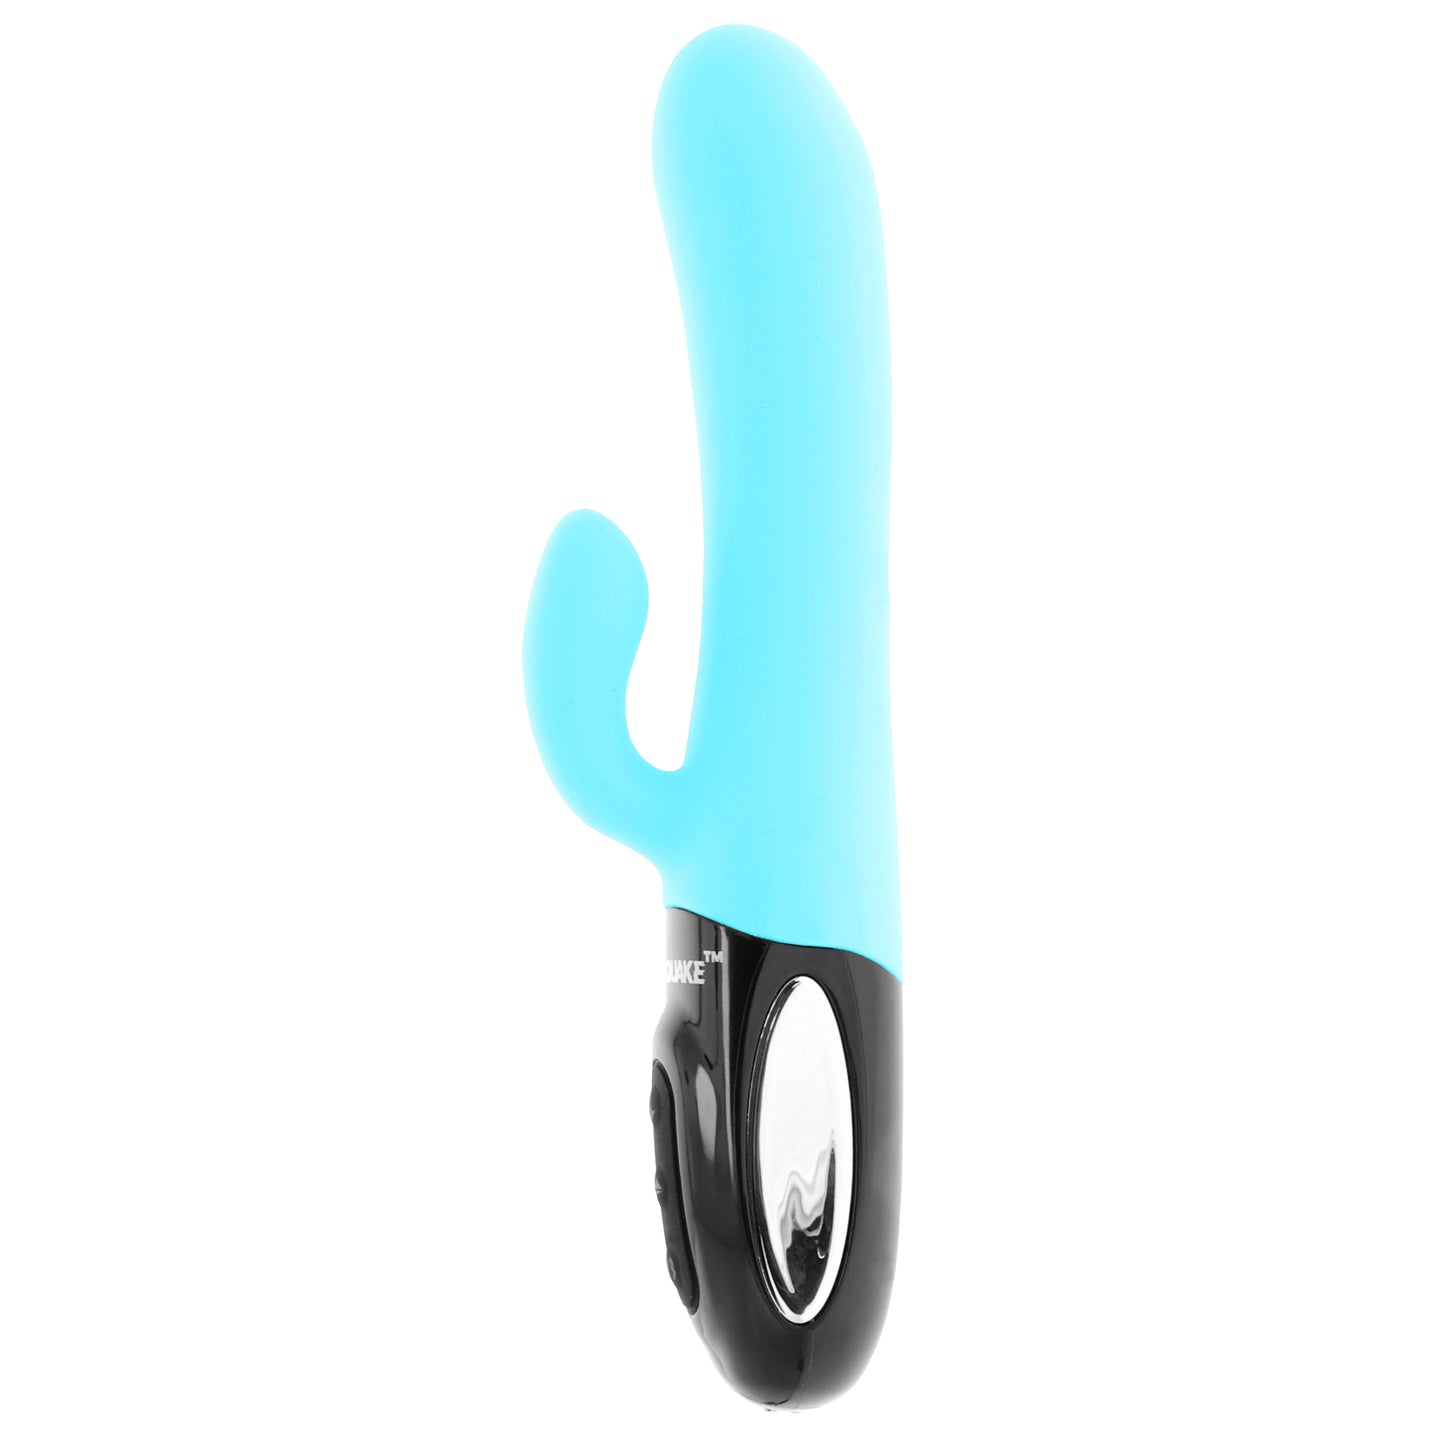 Intense Thrusting Rabbit Vibrator with Clitoral Stroker - The Herquake